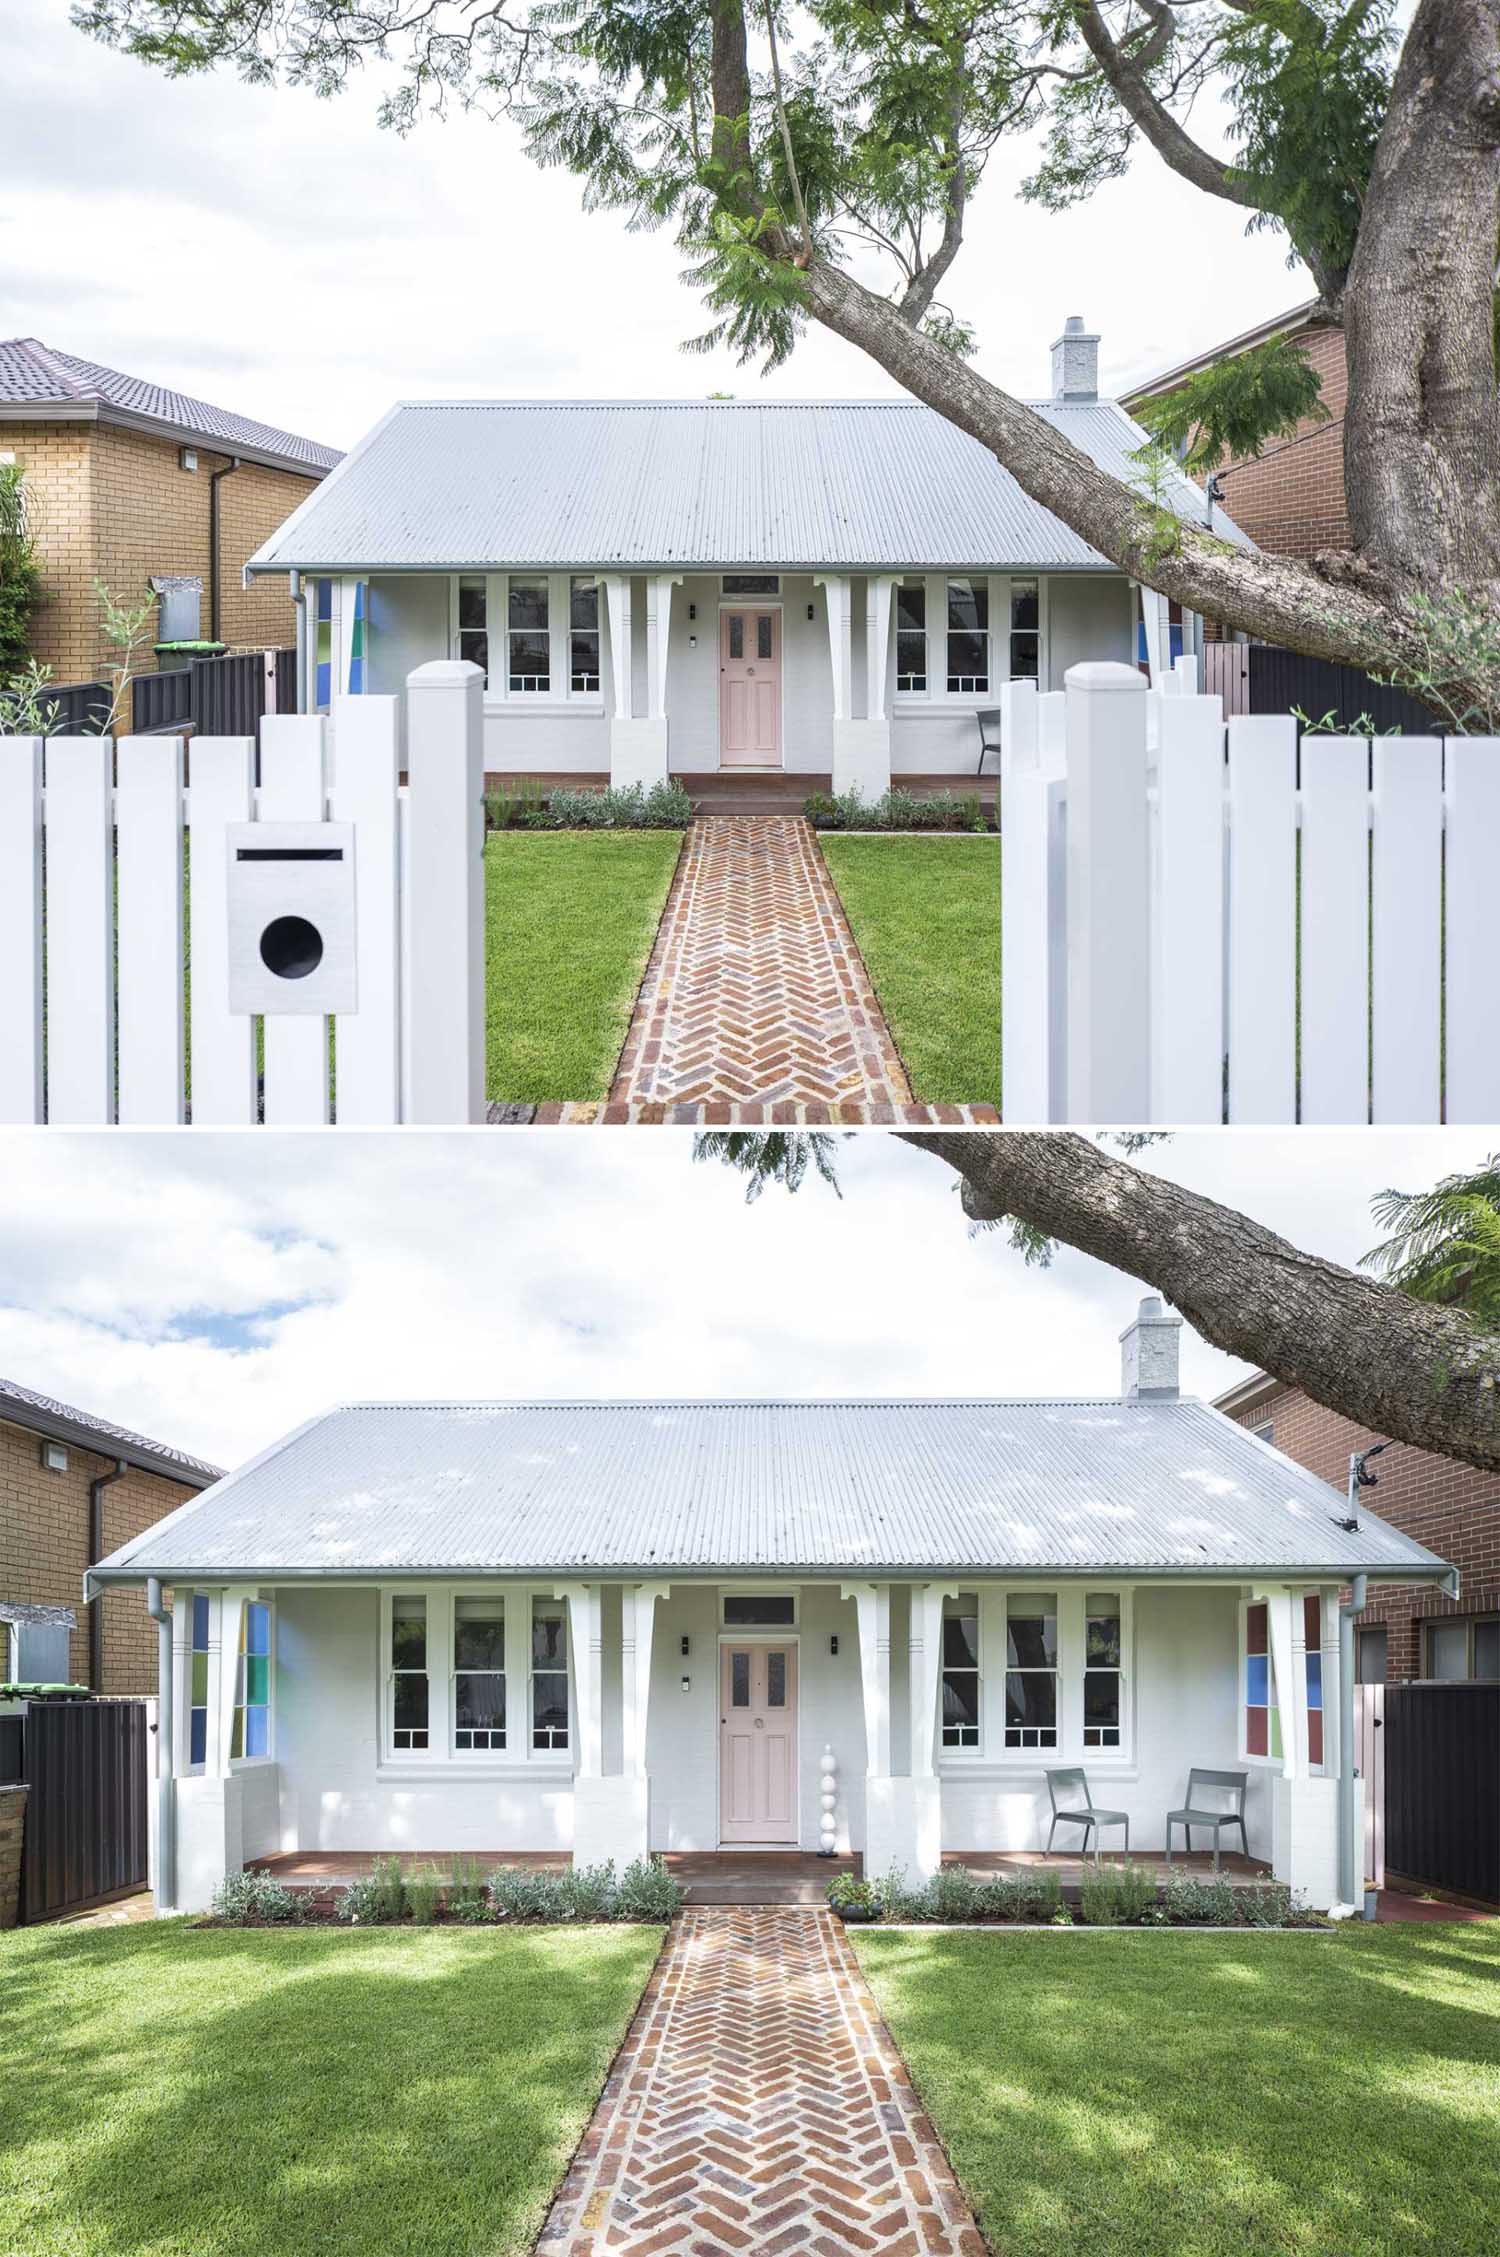 This cute cottage has a front white fence, a brick path, and a porch that runs across the front of the house.